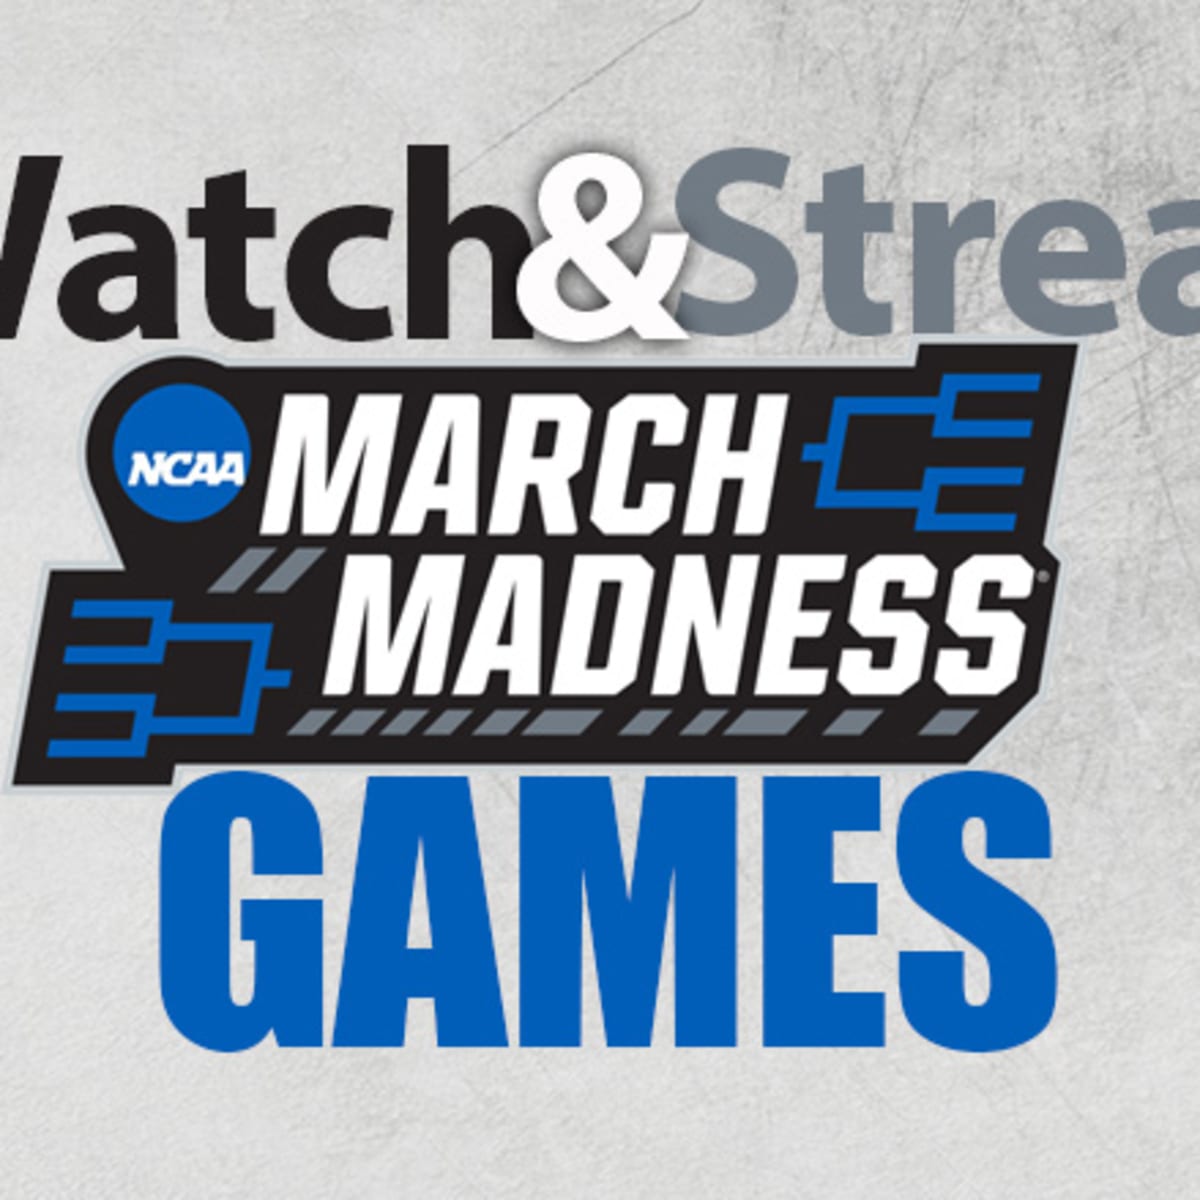 How to Watch and Live Stream March Madness Games Online (some for free)